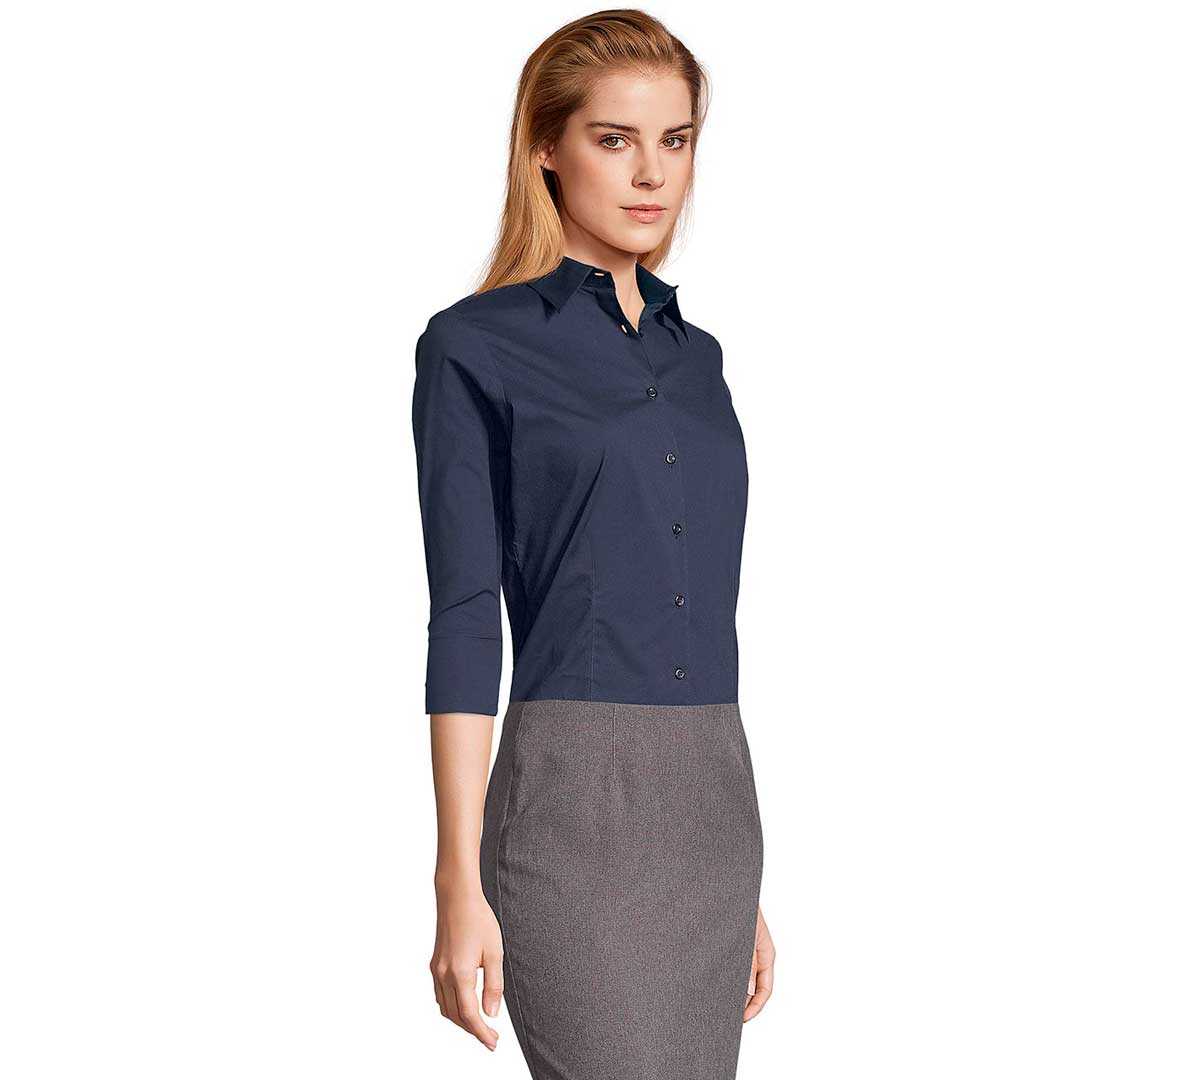 radical Extraer desastre Camisa Stretch Mujer Sol´s Manga 3/4 Effect Azul Oscuro